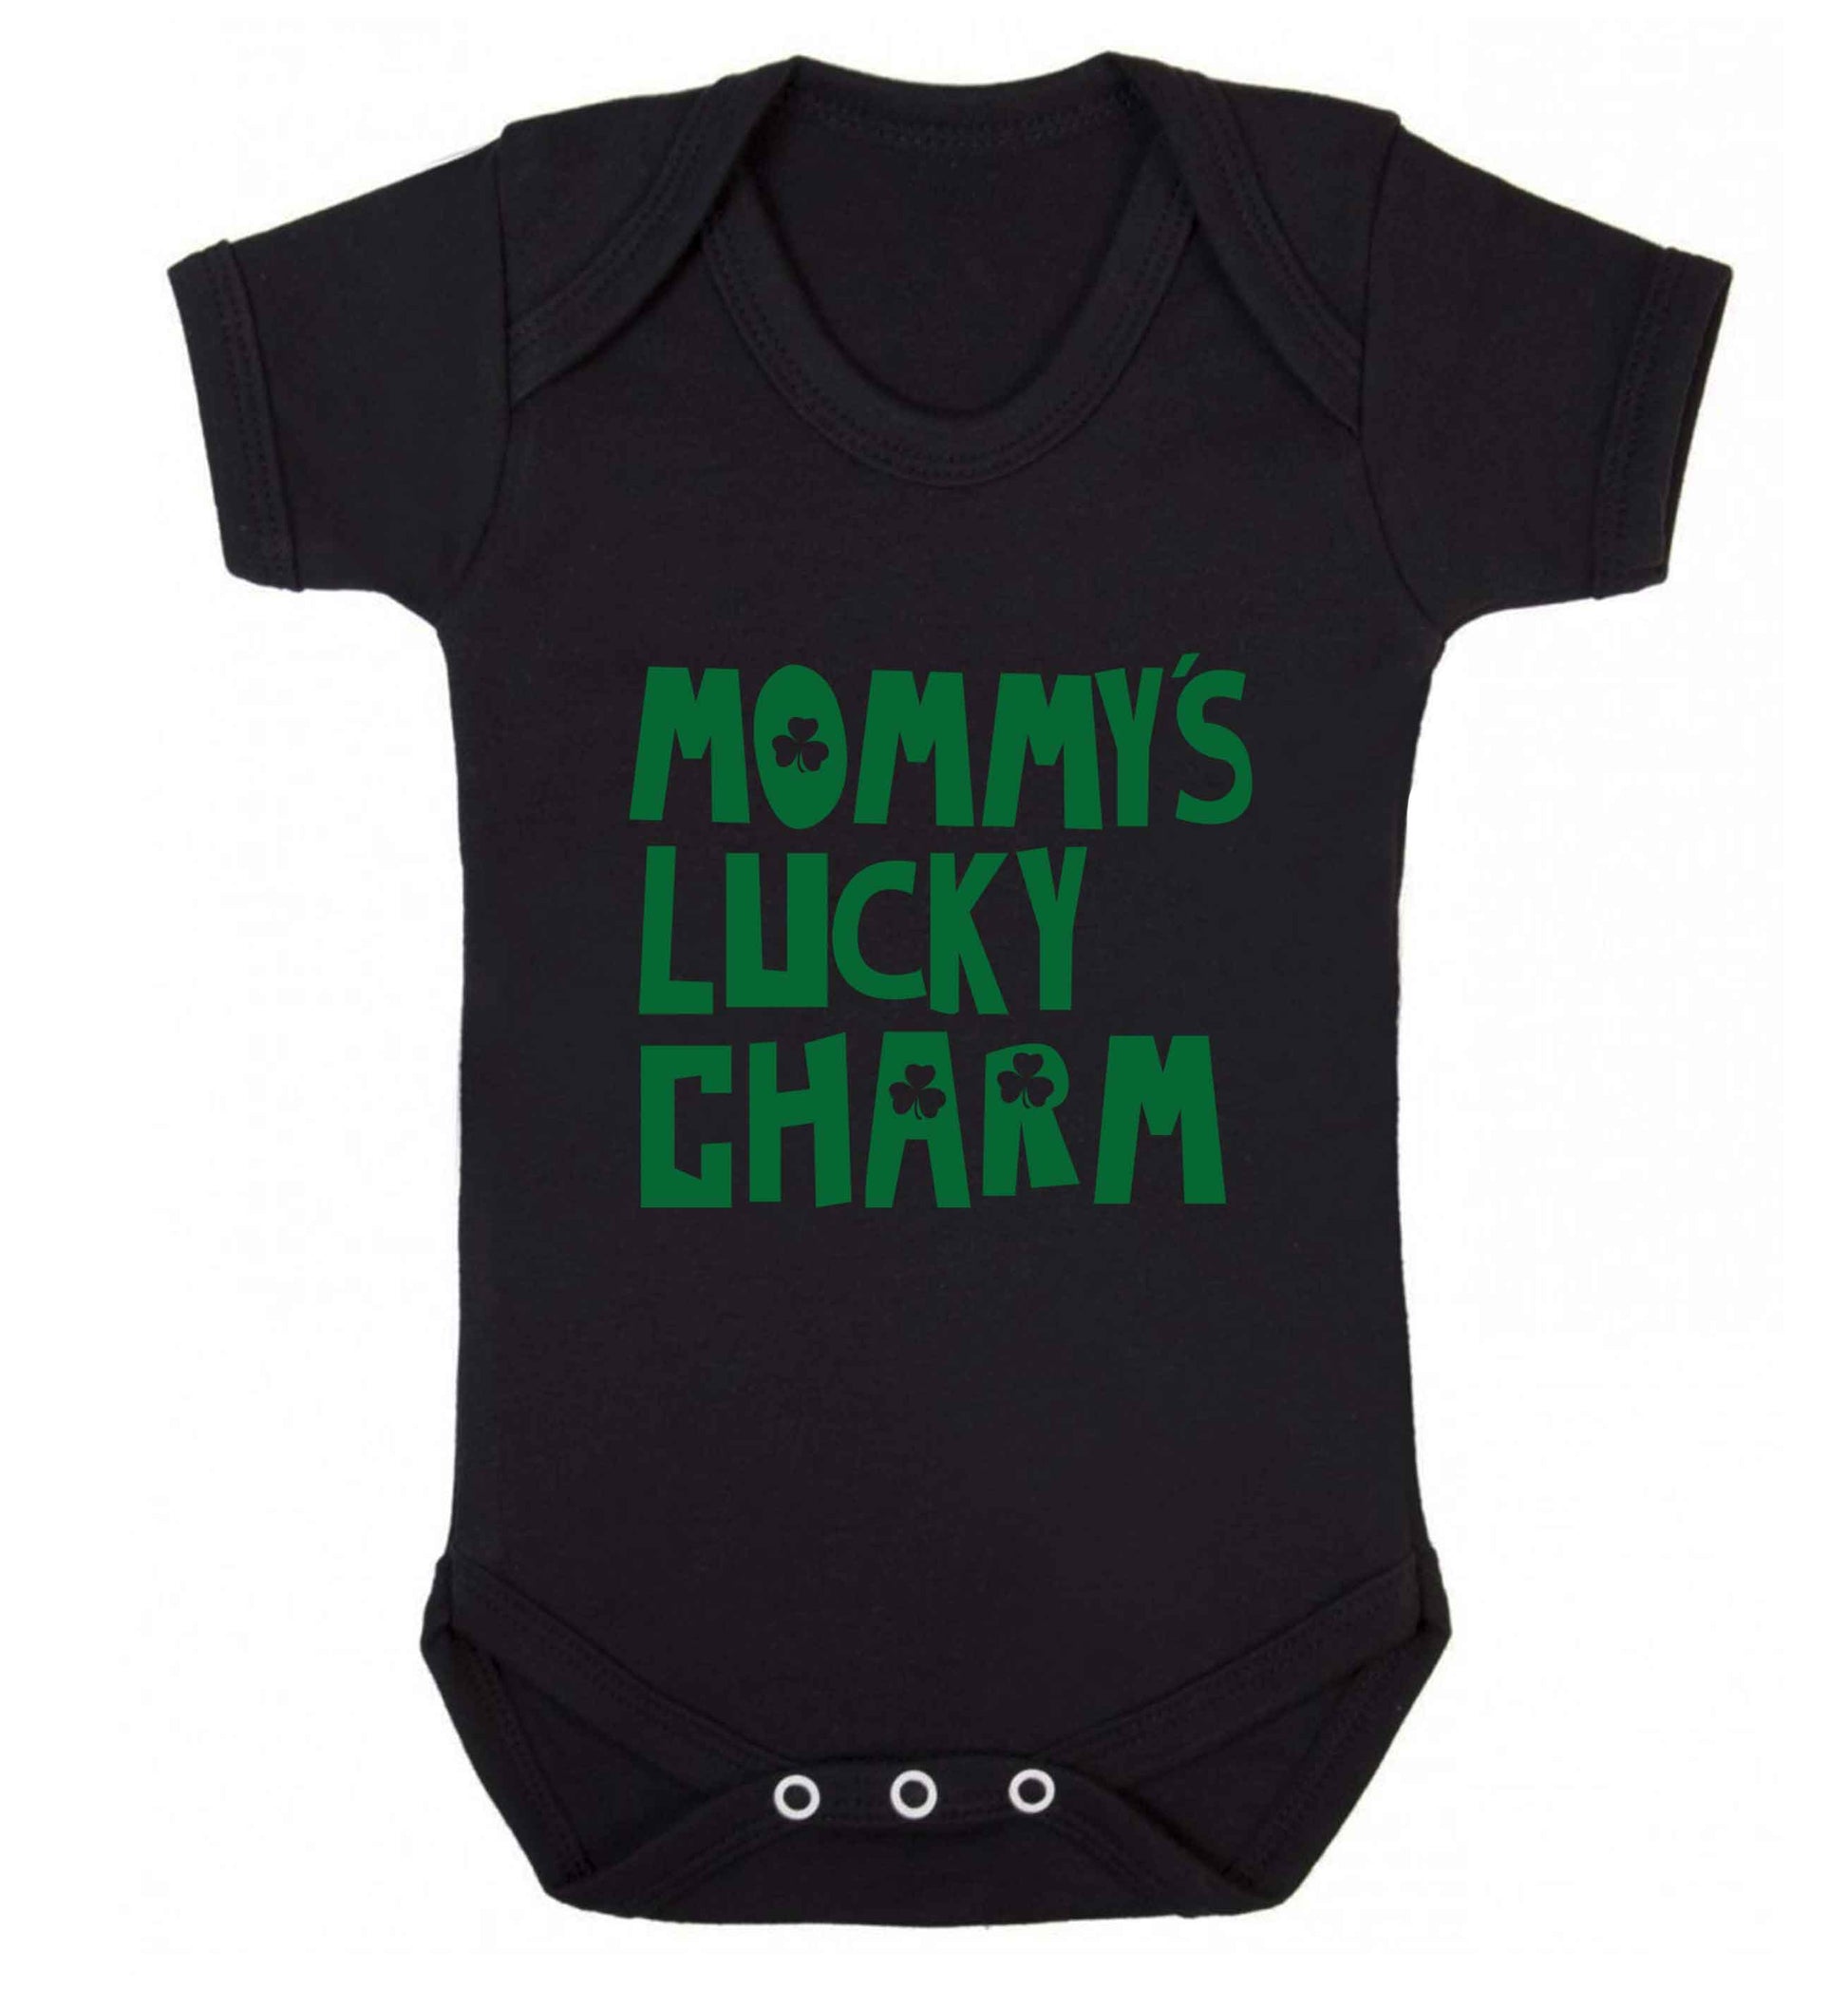 Mommy's lucky charm baby vest black 18-24 months